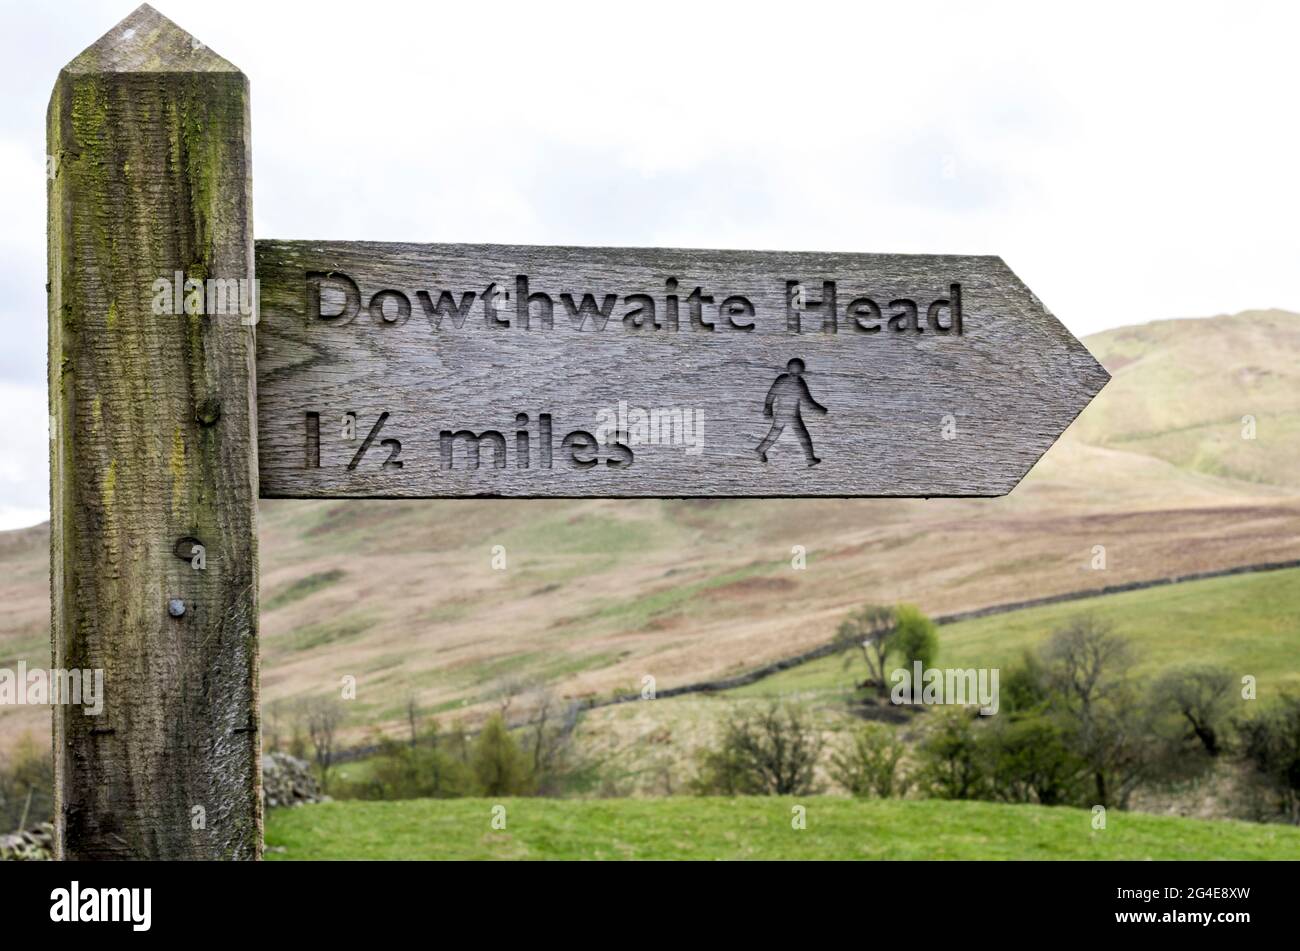 A wooden signpost in the Lake District, Cumbria, UK pointing to Dowthwaite Head. Stock Photo